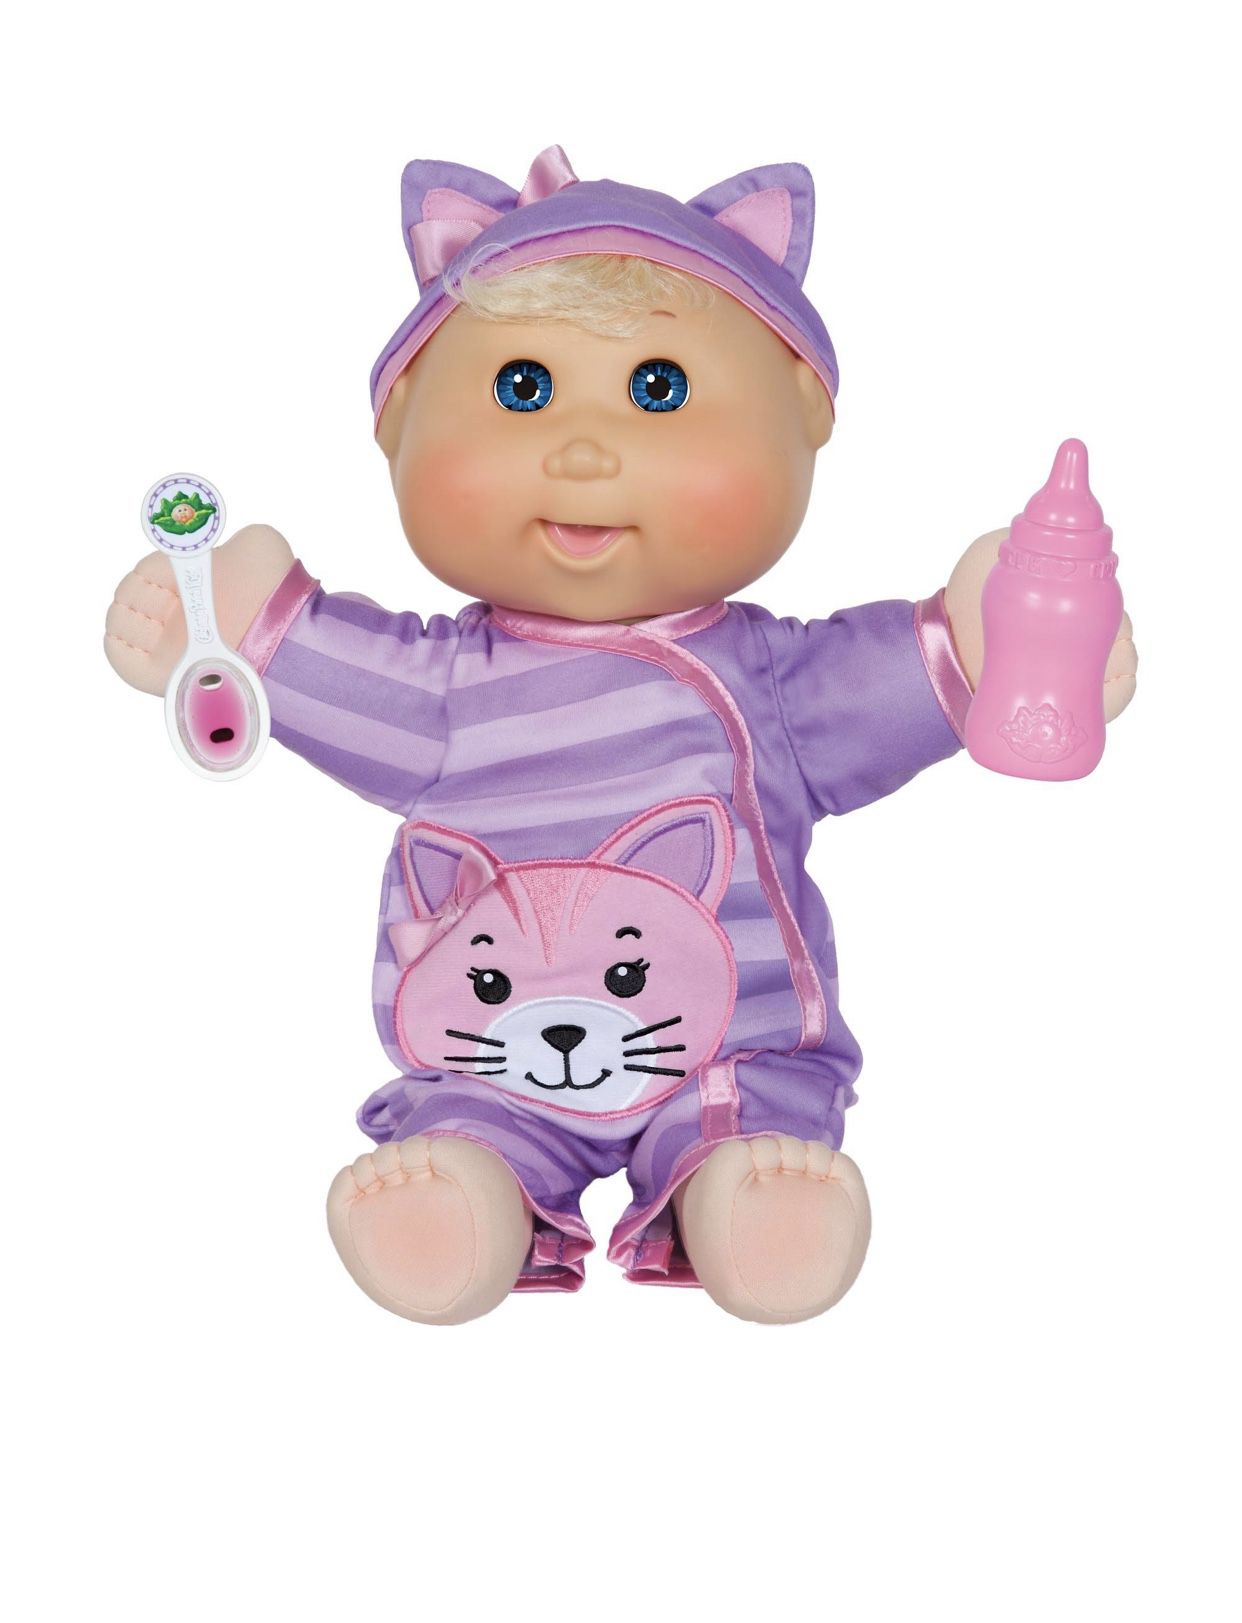 New Cabbage Patch Kids Baby So Real doll, Blonde Girl SUMMERLIN